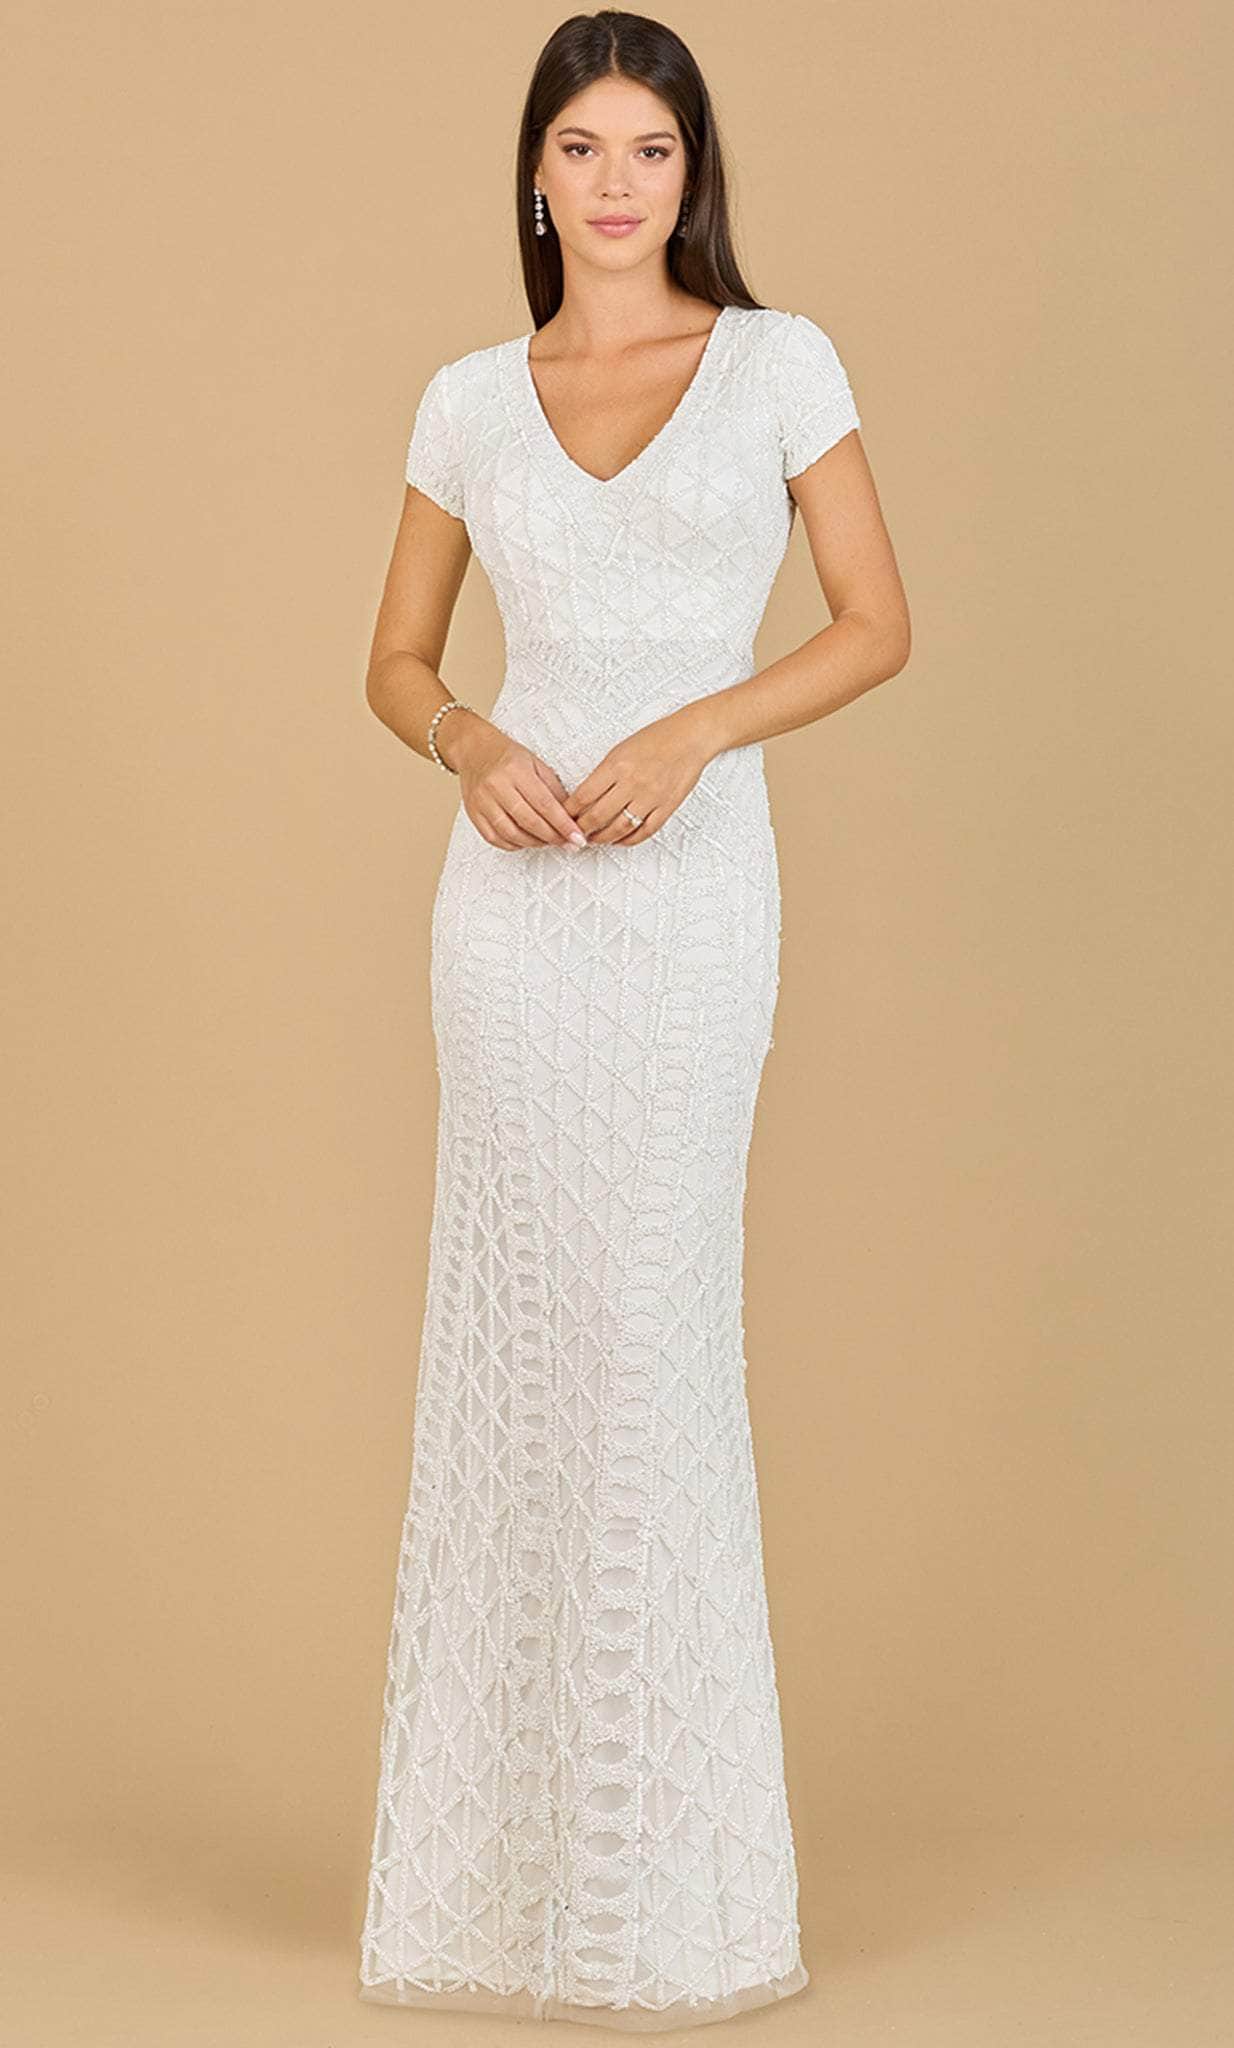 Lara Dresses 51141 - Embroidered Lace Formal Dress Special Occasion Dress 2 / Ivory